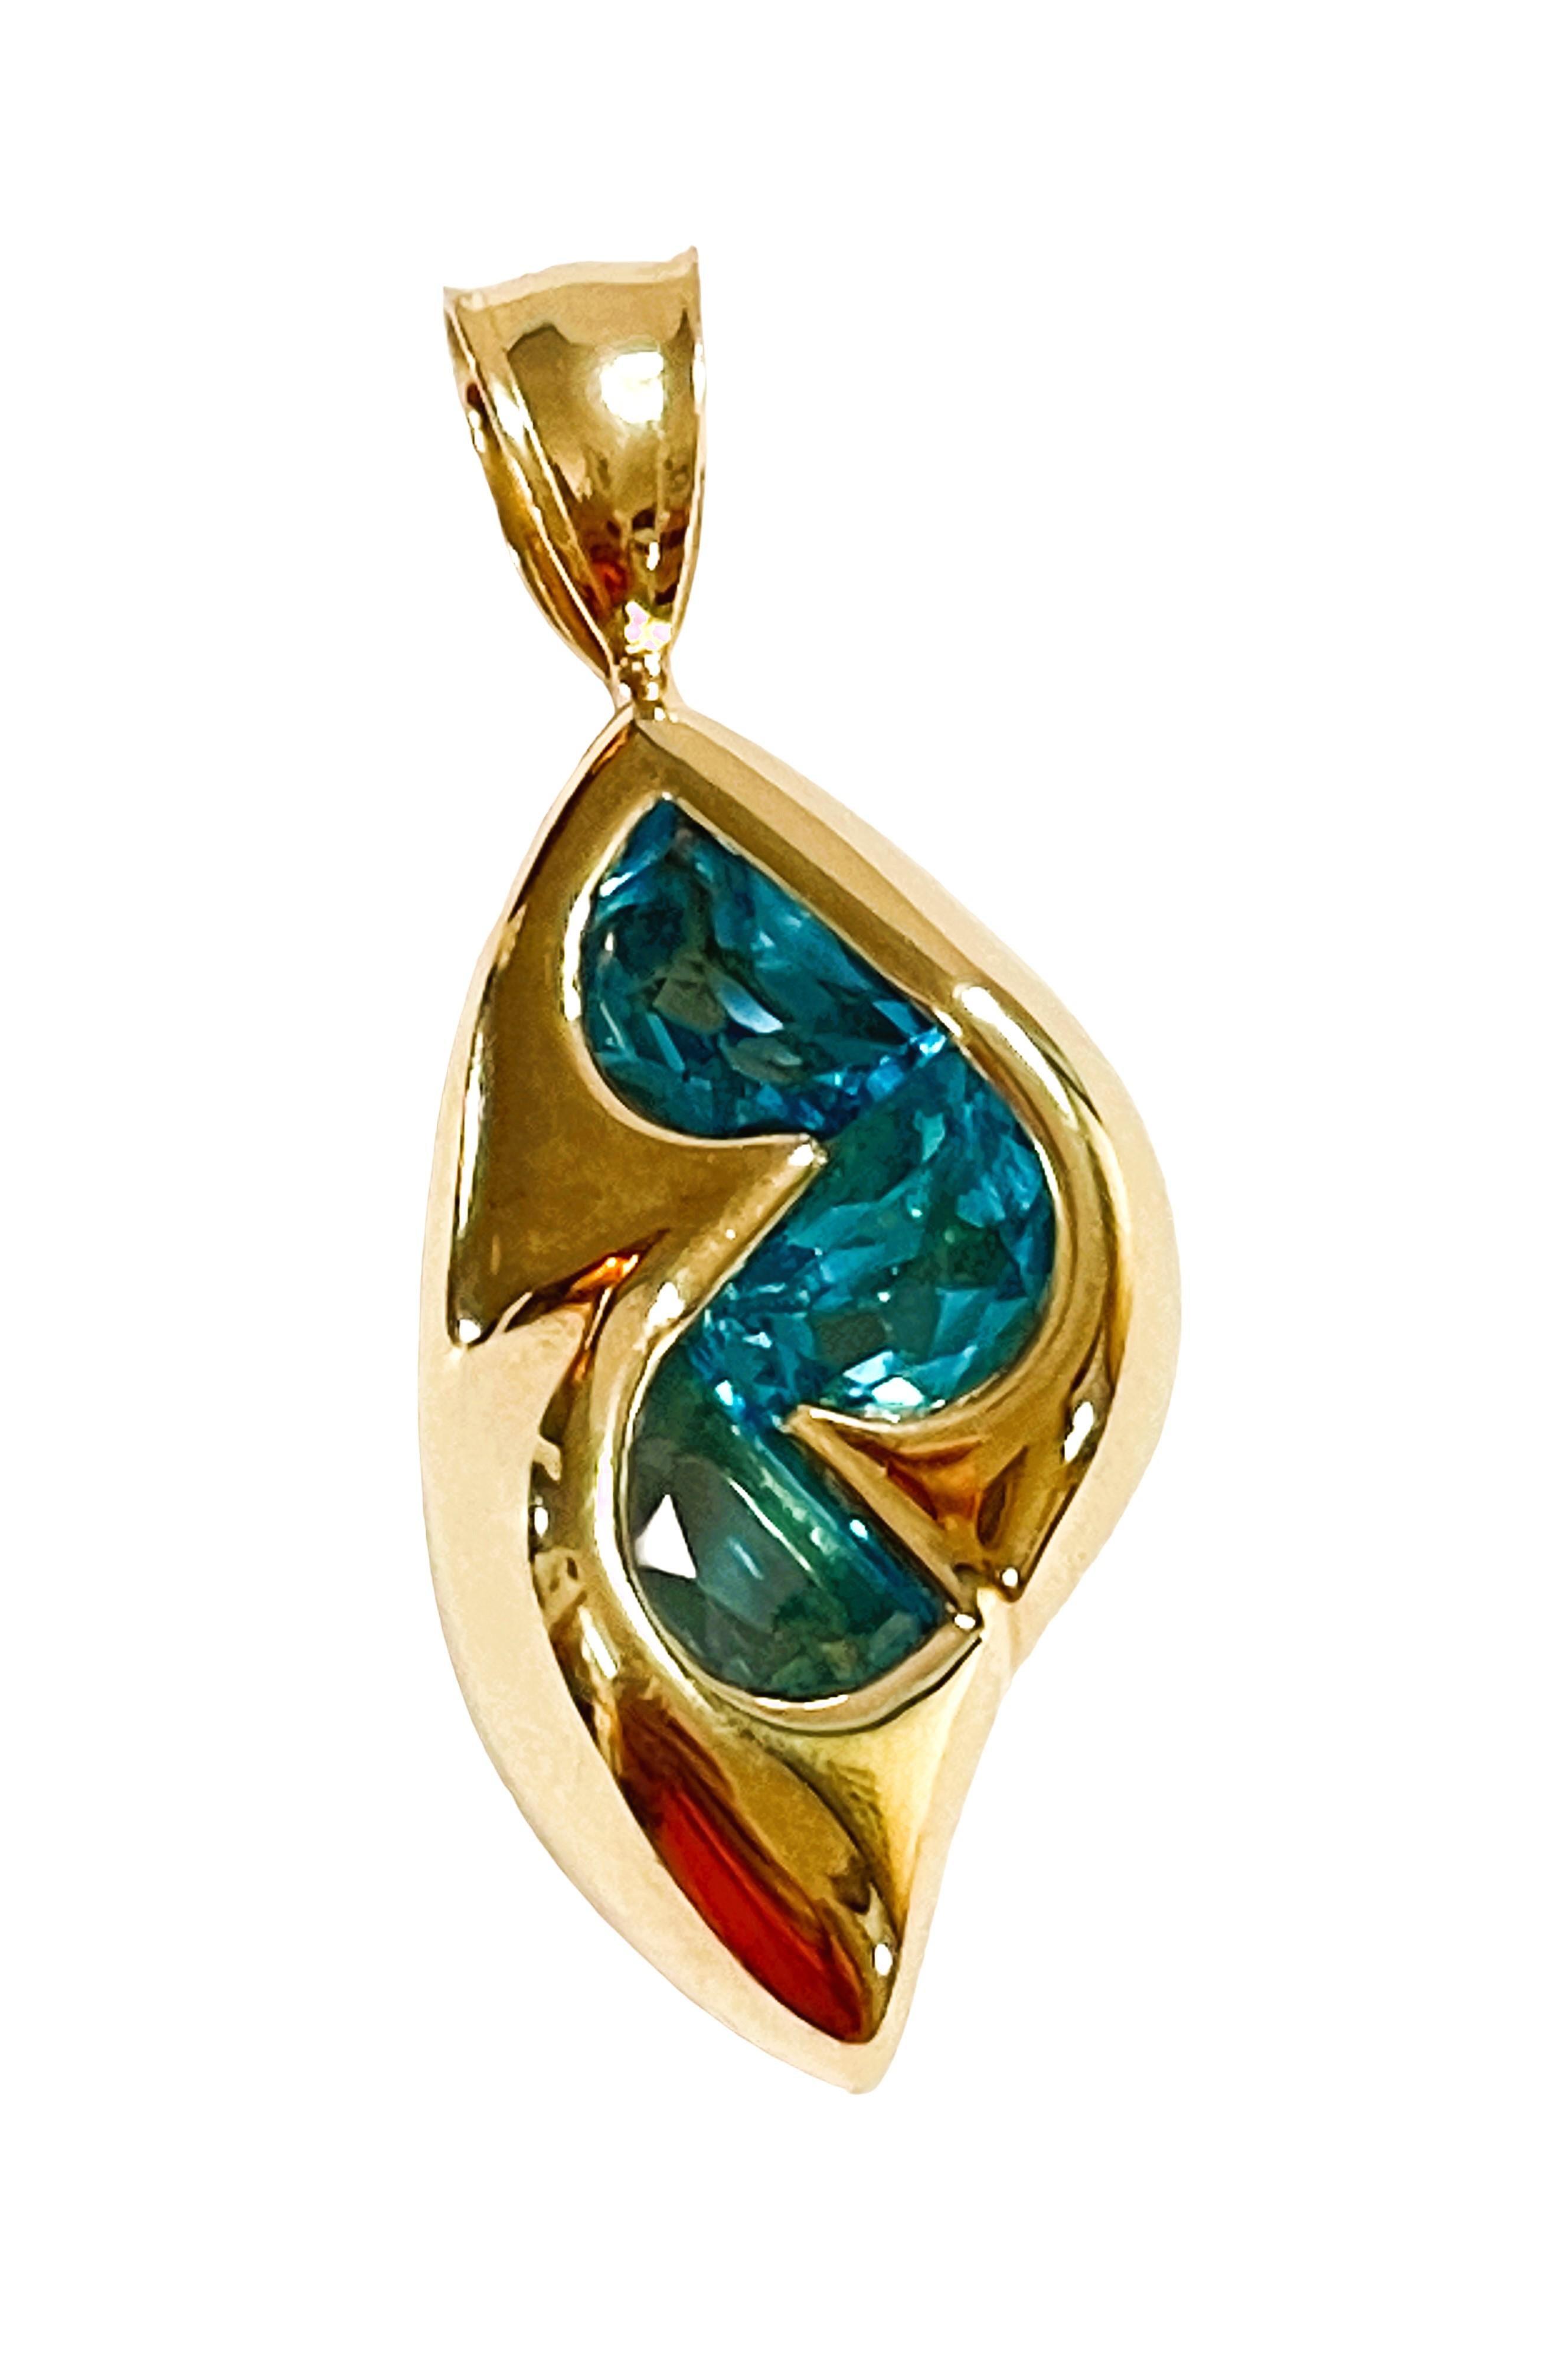 Mixed Cut 14k Yellow Gold Handmade Fancy Cut Blue Topaz Pendant with Appraisal For Sale